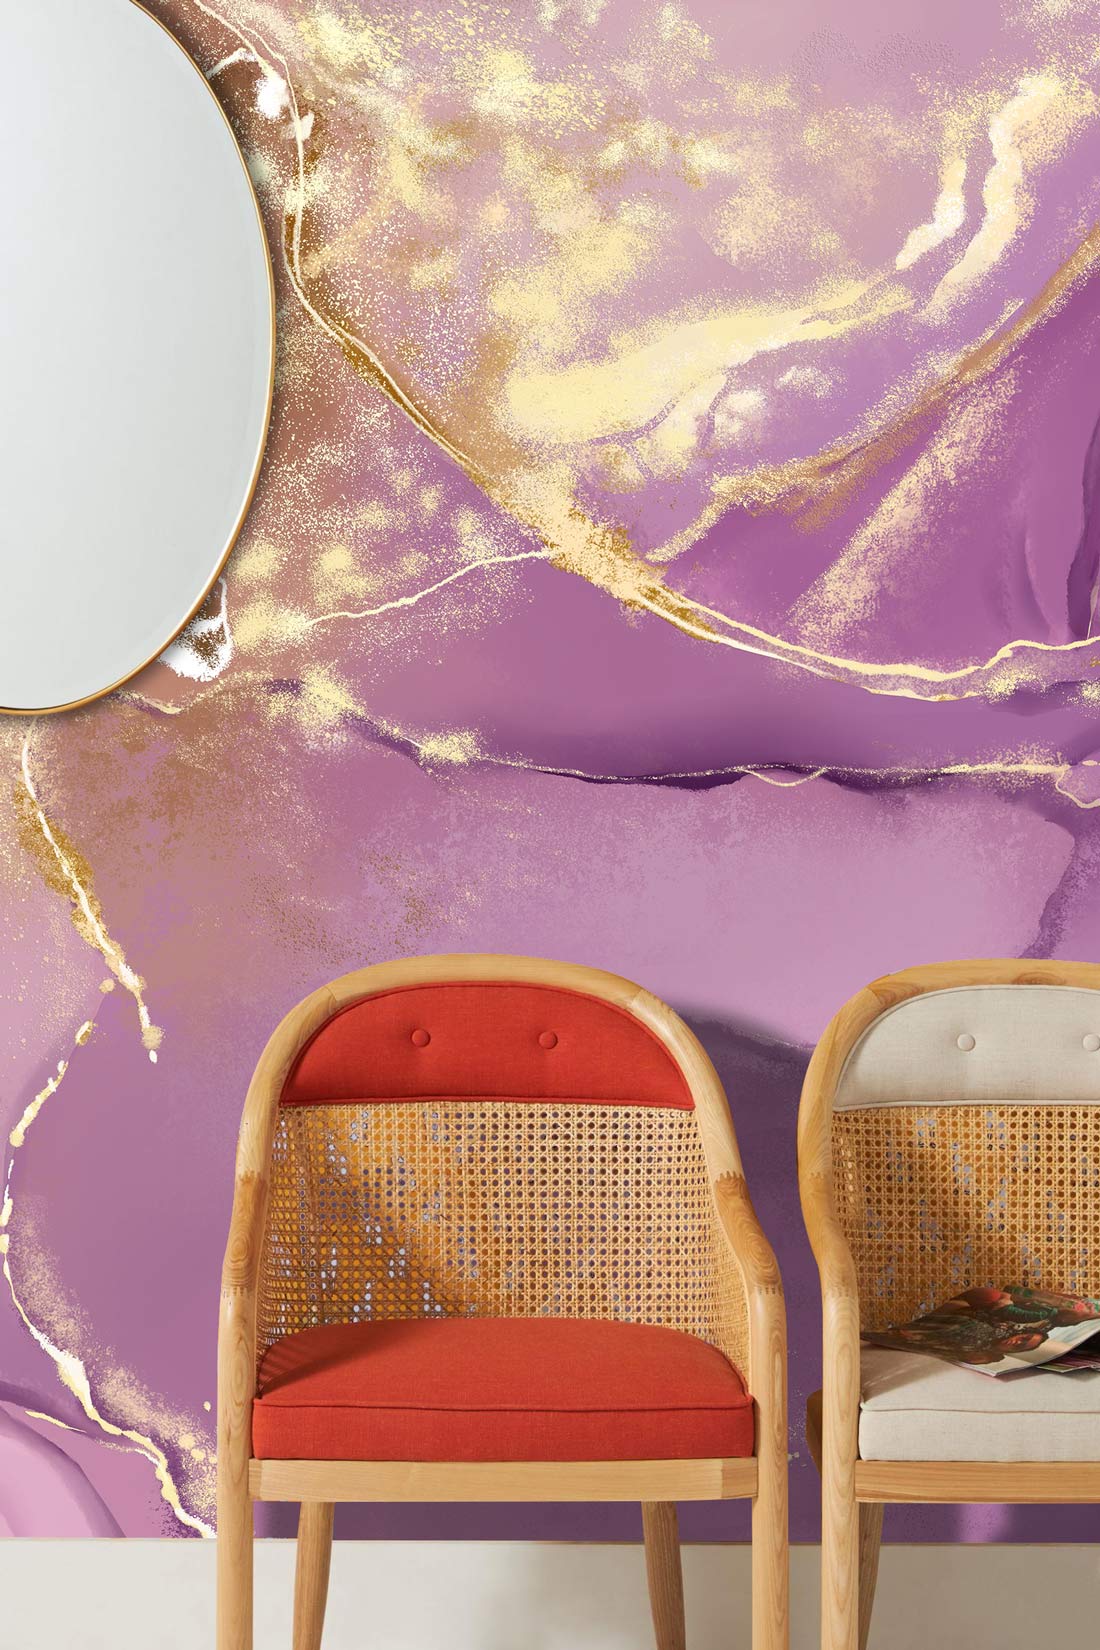 Decorate Your Hallway With This Purple and Gold Marble Wallpaper Mural!